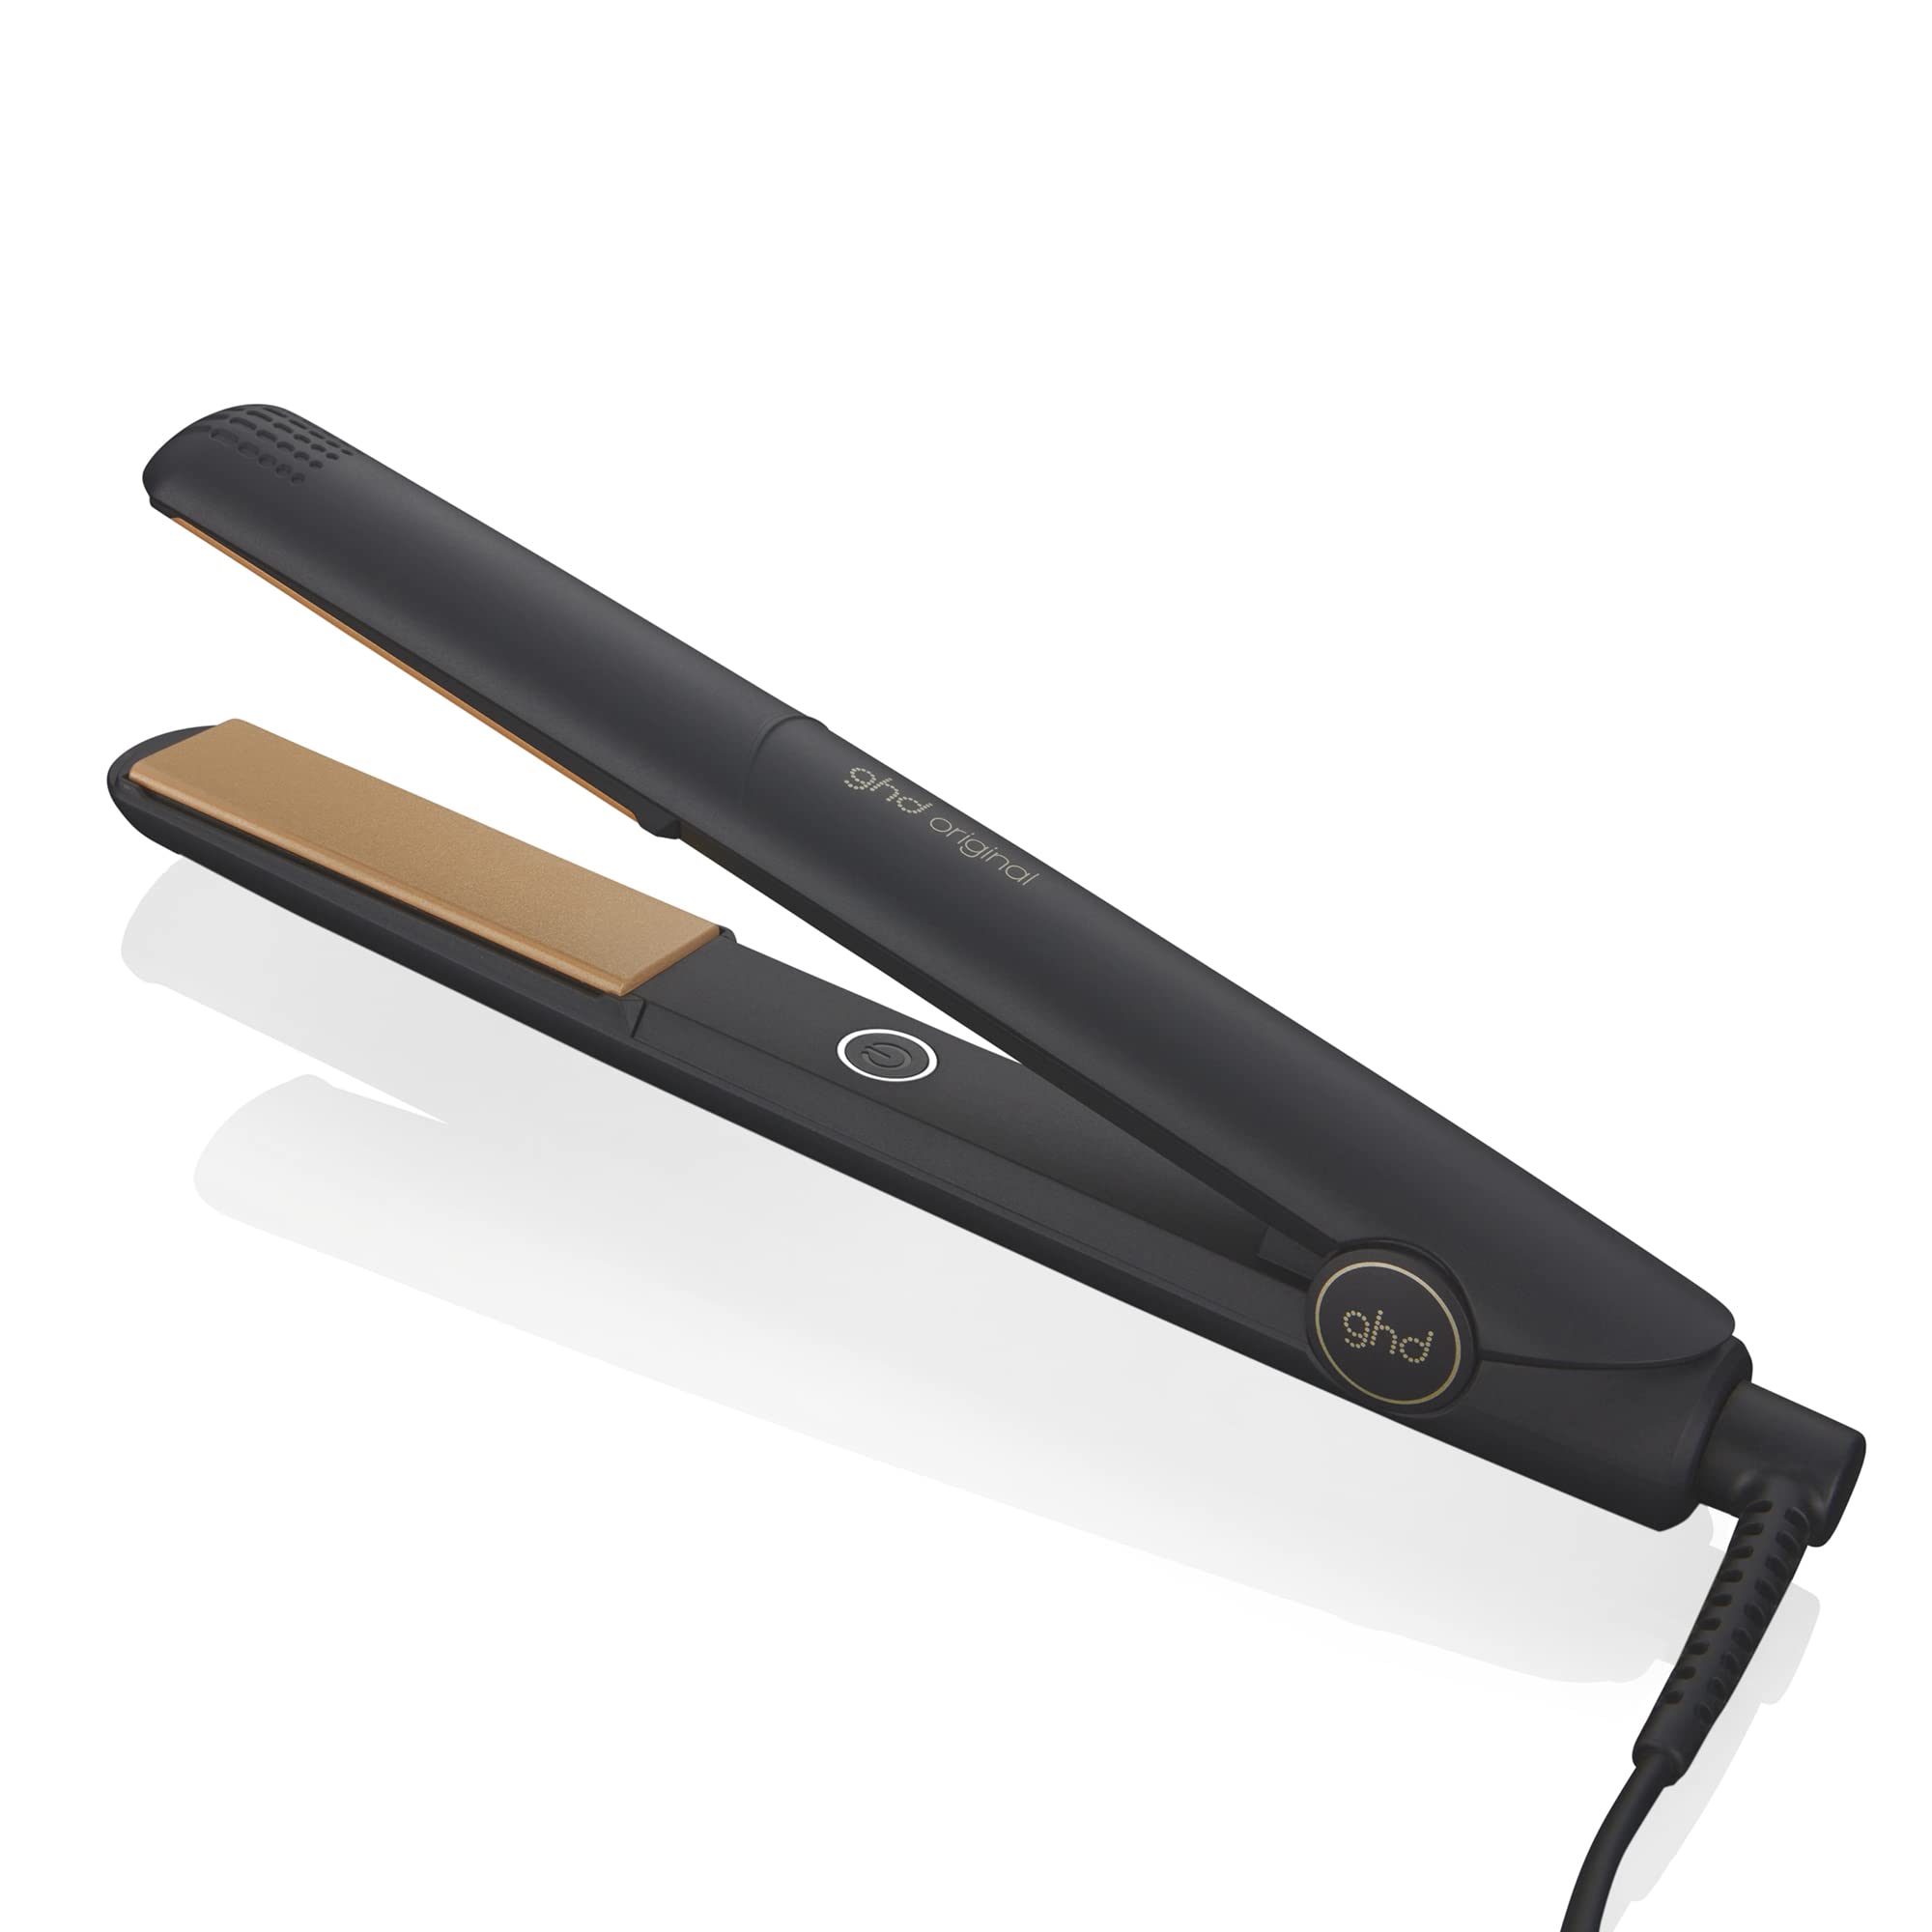 Ghd Original Styler - 1 inch Flat Iron, Classic Original IV Hair  Straightener with New and Improved